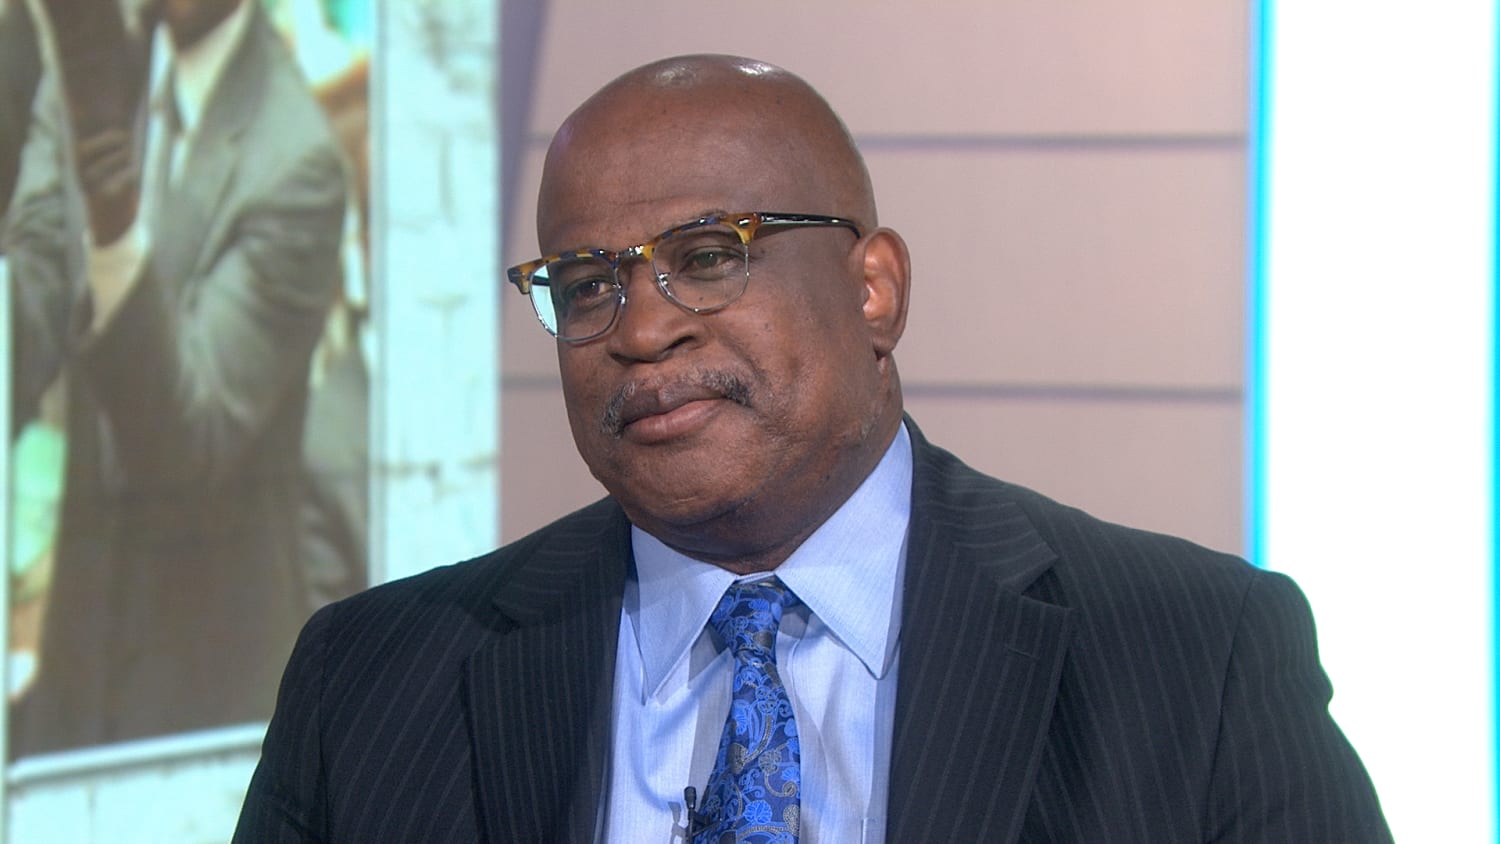 Christopher Darden On O J Simpson The Gloves And Romance Rumors With Marcia Clark